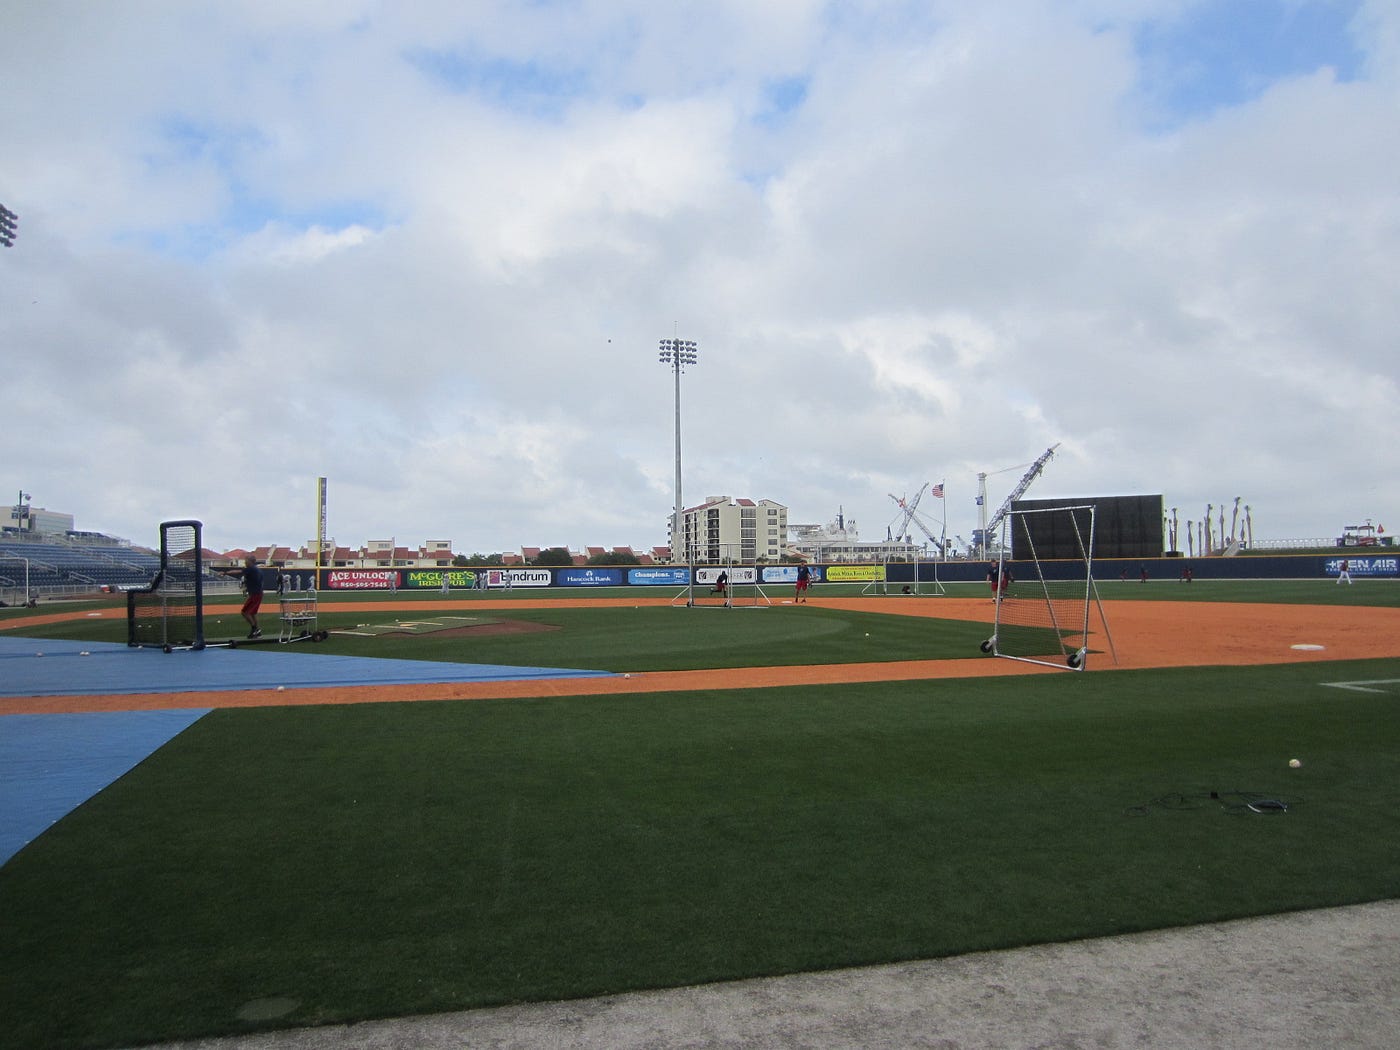 Pensacola Blue Wahoos return home following two weeks on the road